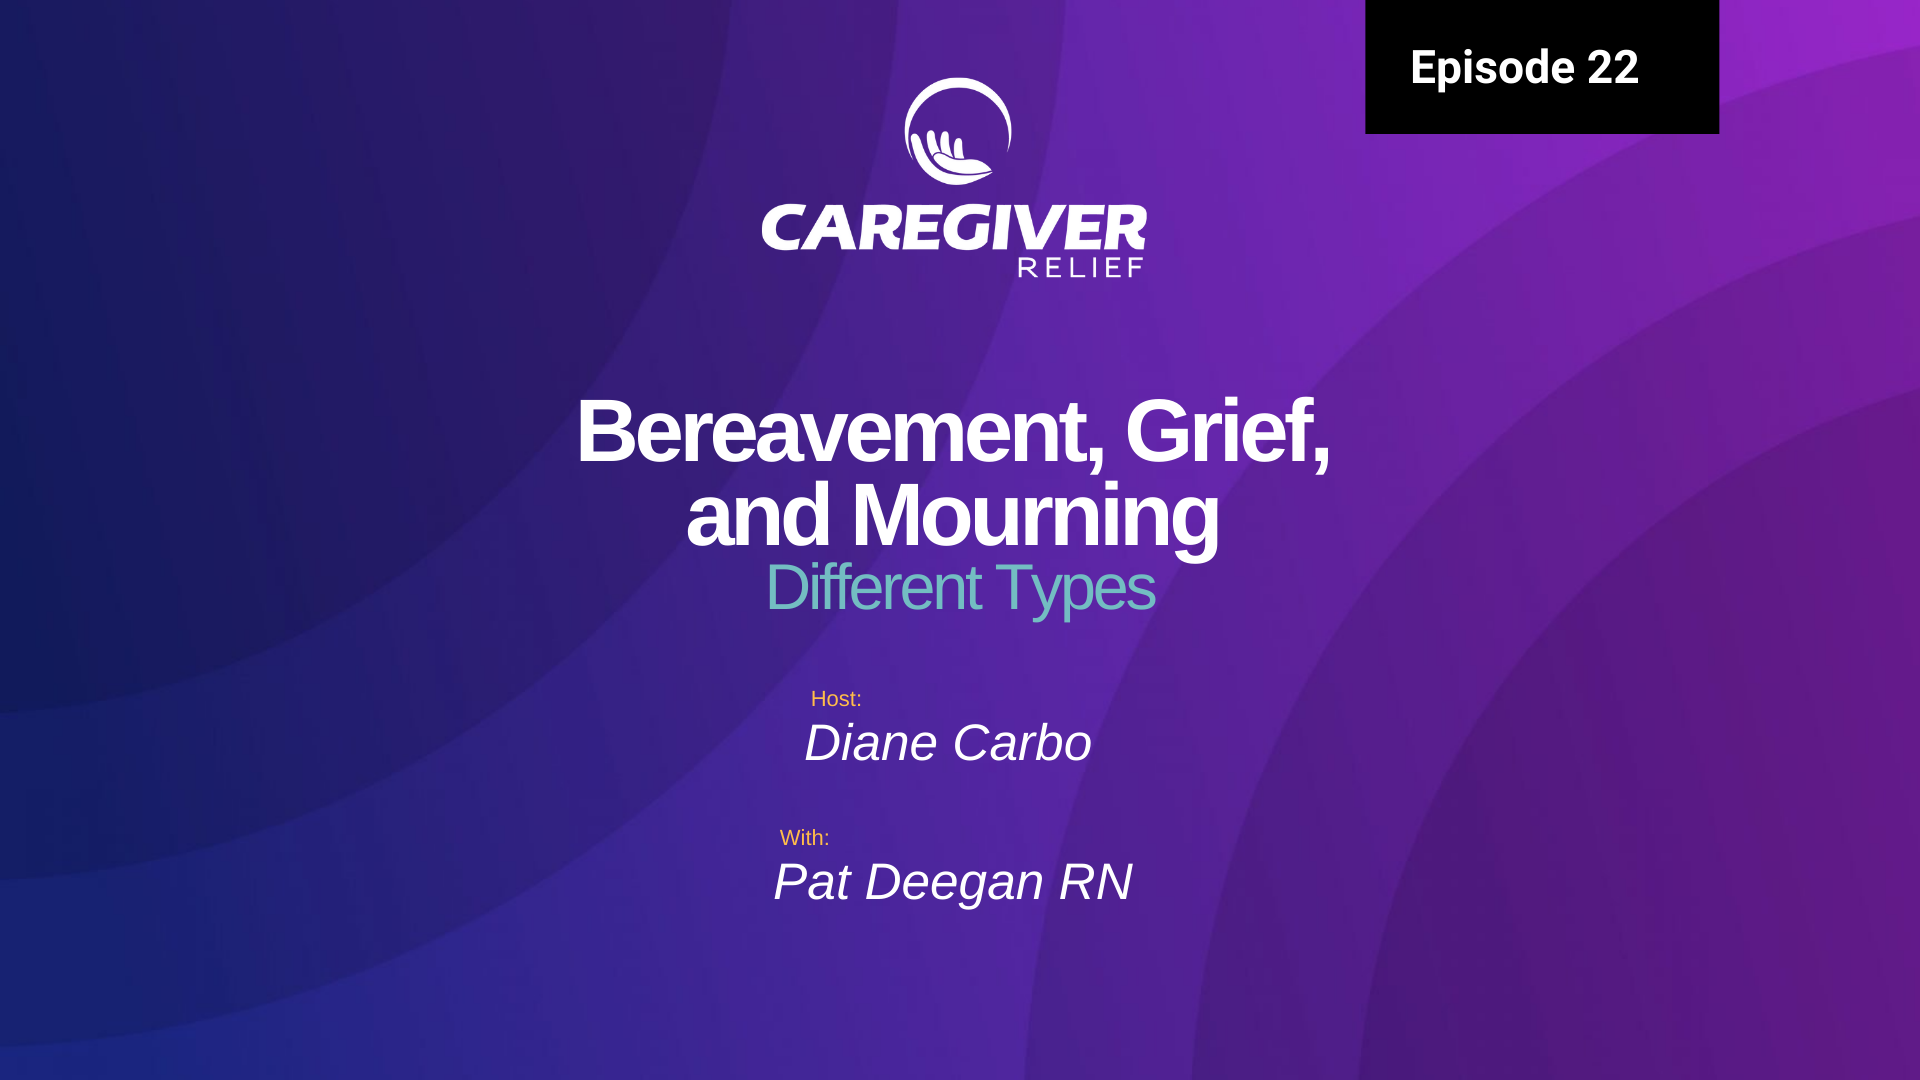 Episode 22 – Pat Deegan RN – Bereavement, Grief, and Mourning